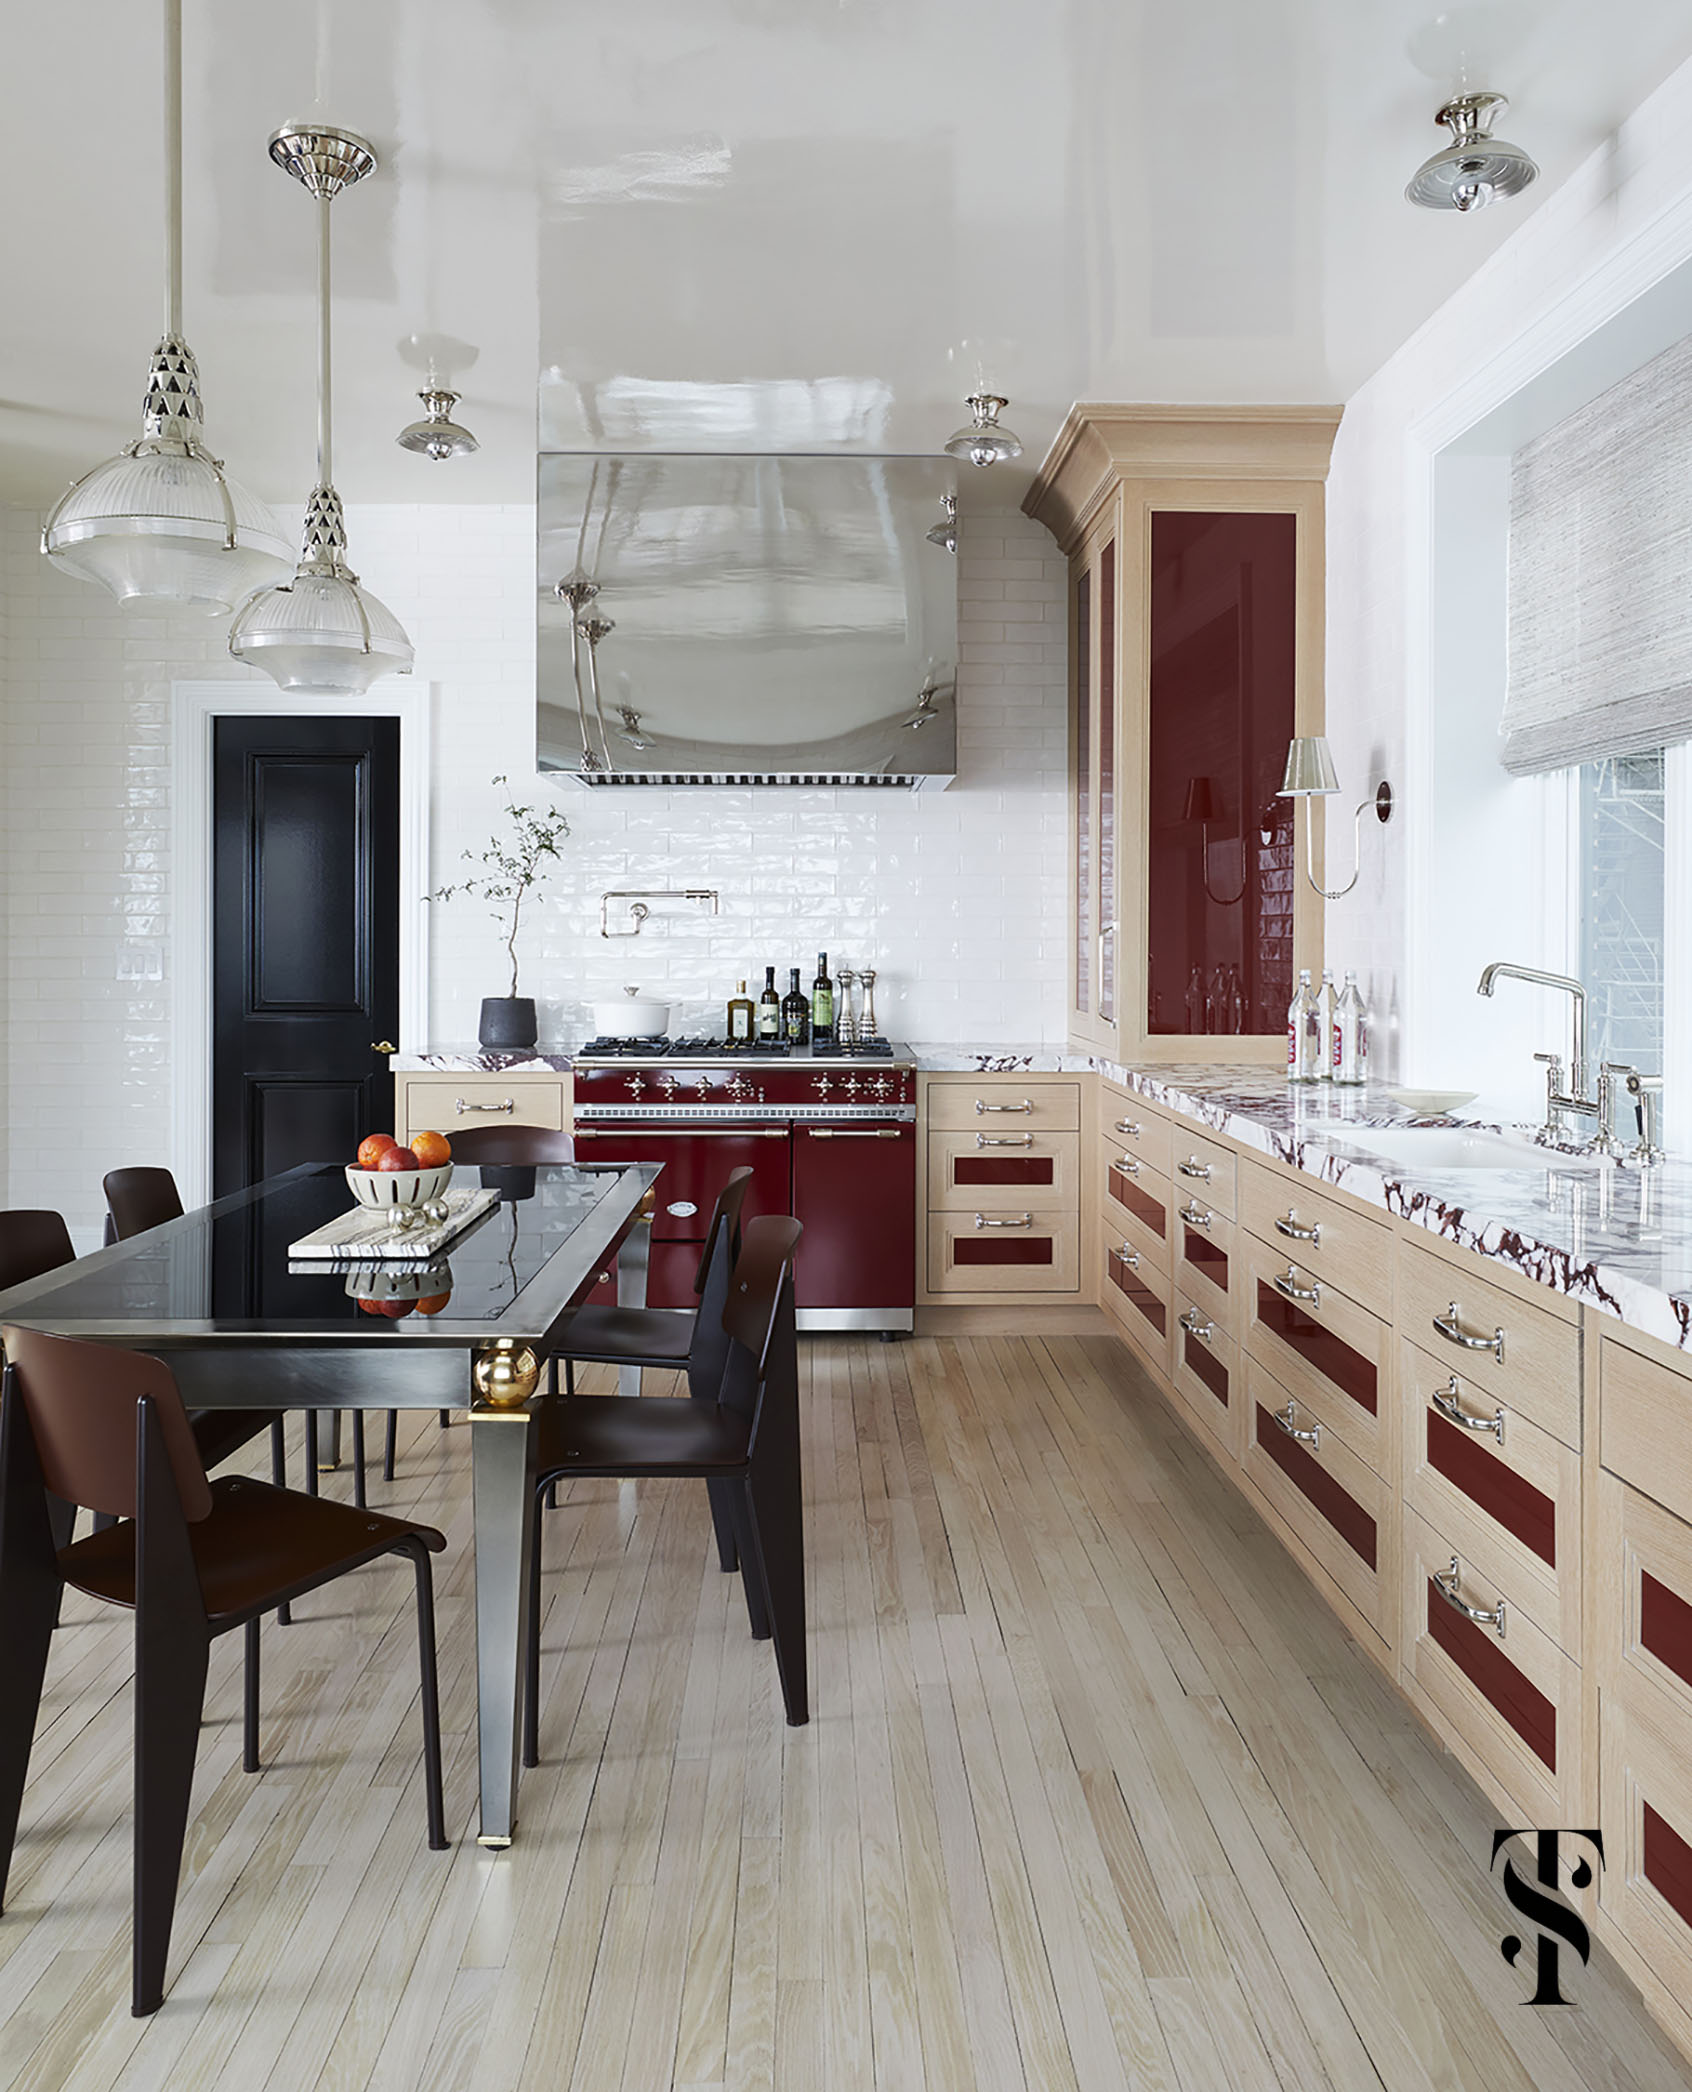 glossy details from a mirror-finish polished stainless steel hood to high-gloss cabinetry inserts in burgundy red & even a lacquered ceiling give this kitchen by interior designer Summer Thornton a water-like reflective quality, emulating the waves of Lake Michigan that it overlooks